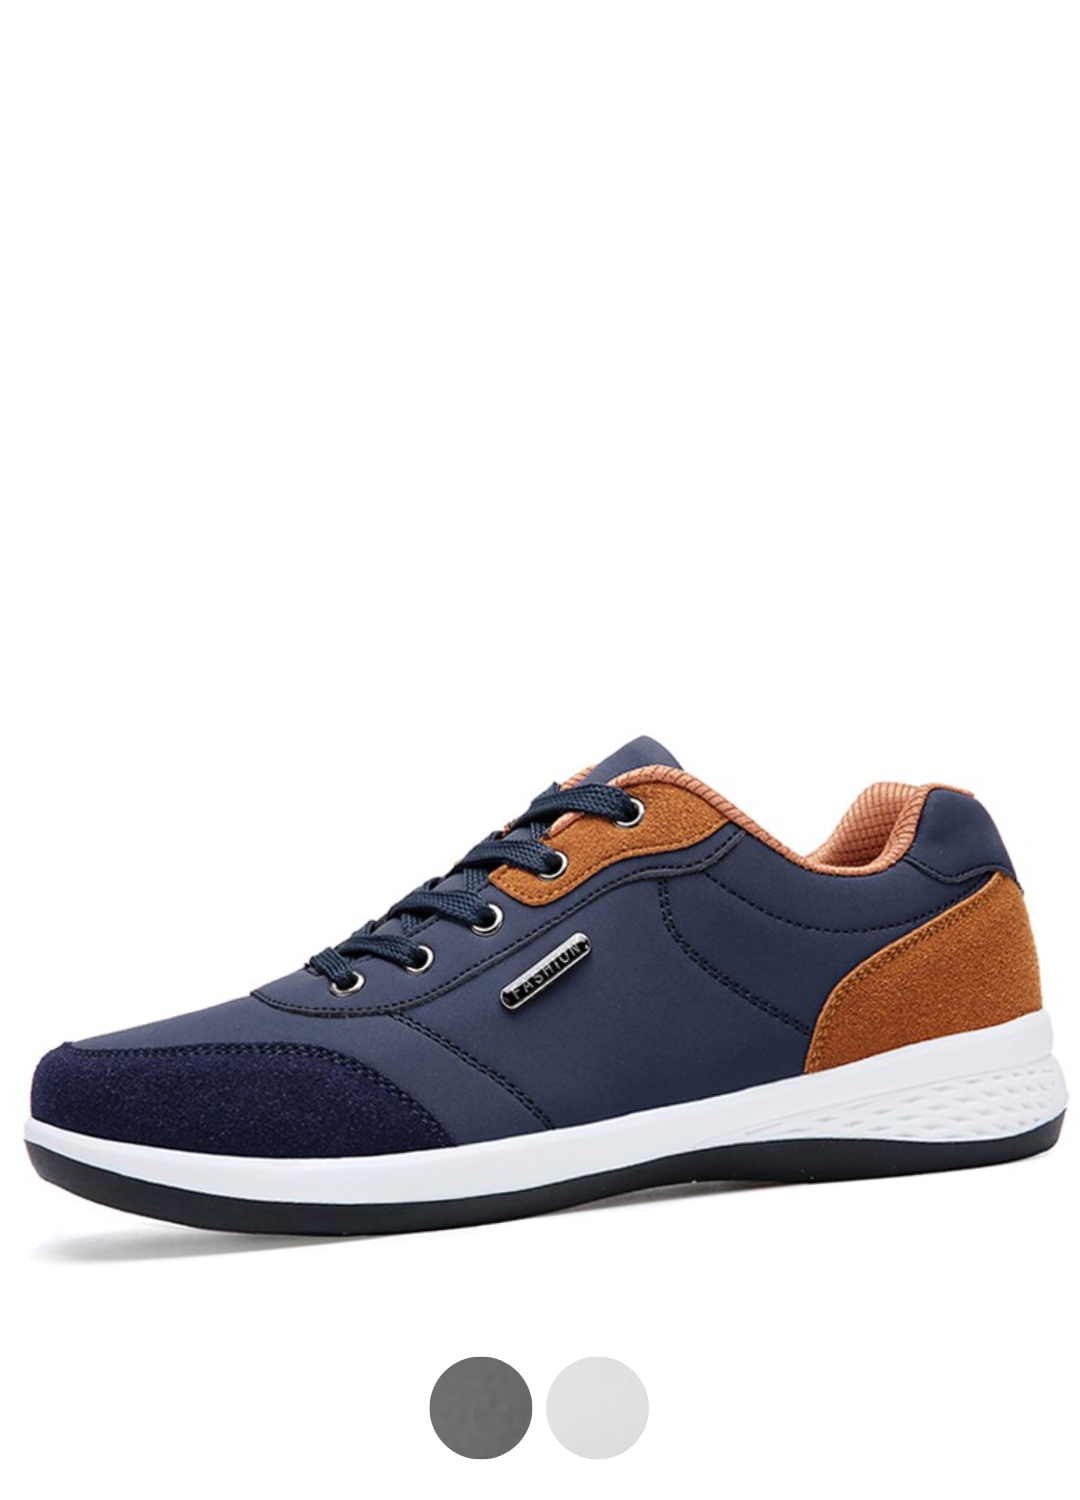 Snejider Men's Fashion Sneakers | Ultrasellershoes.com – USS® Shoes